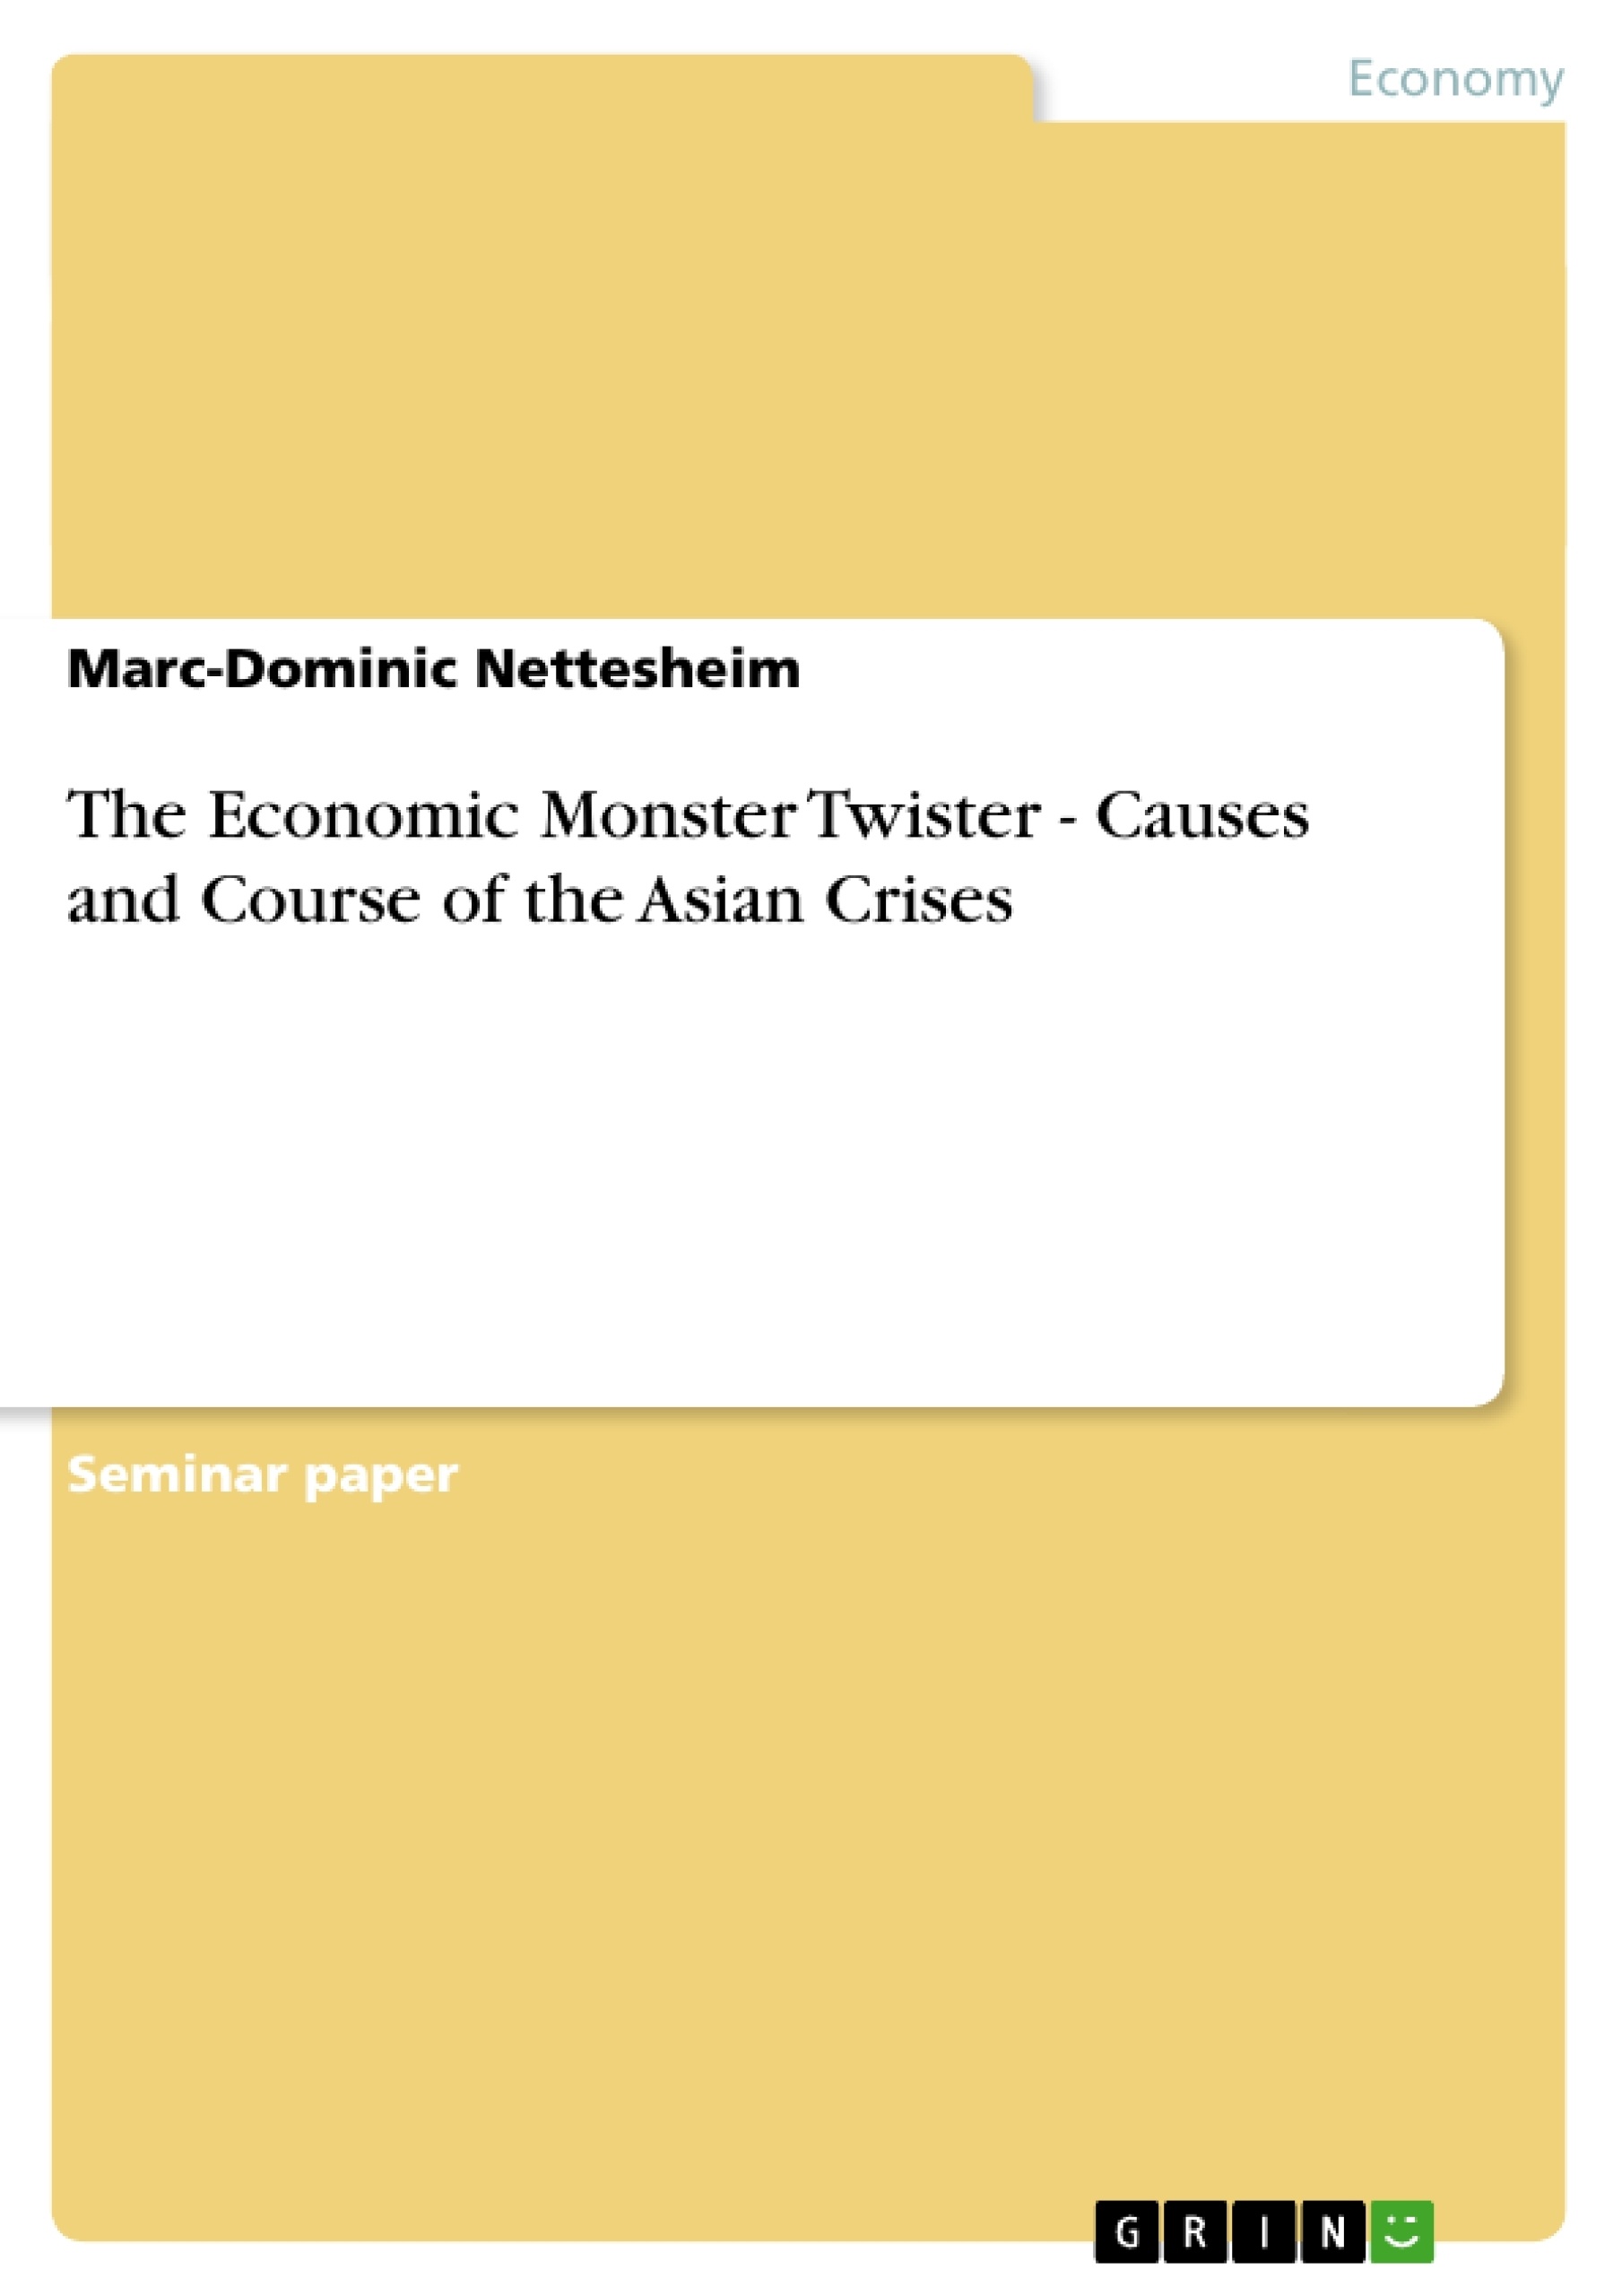 Title: The Economic Monster Twister - Causes and Course of the Asian Crises